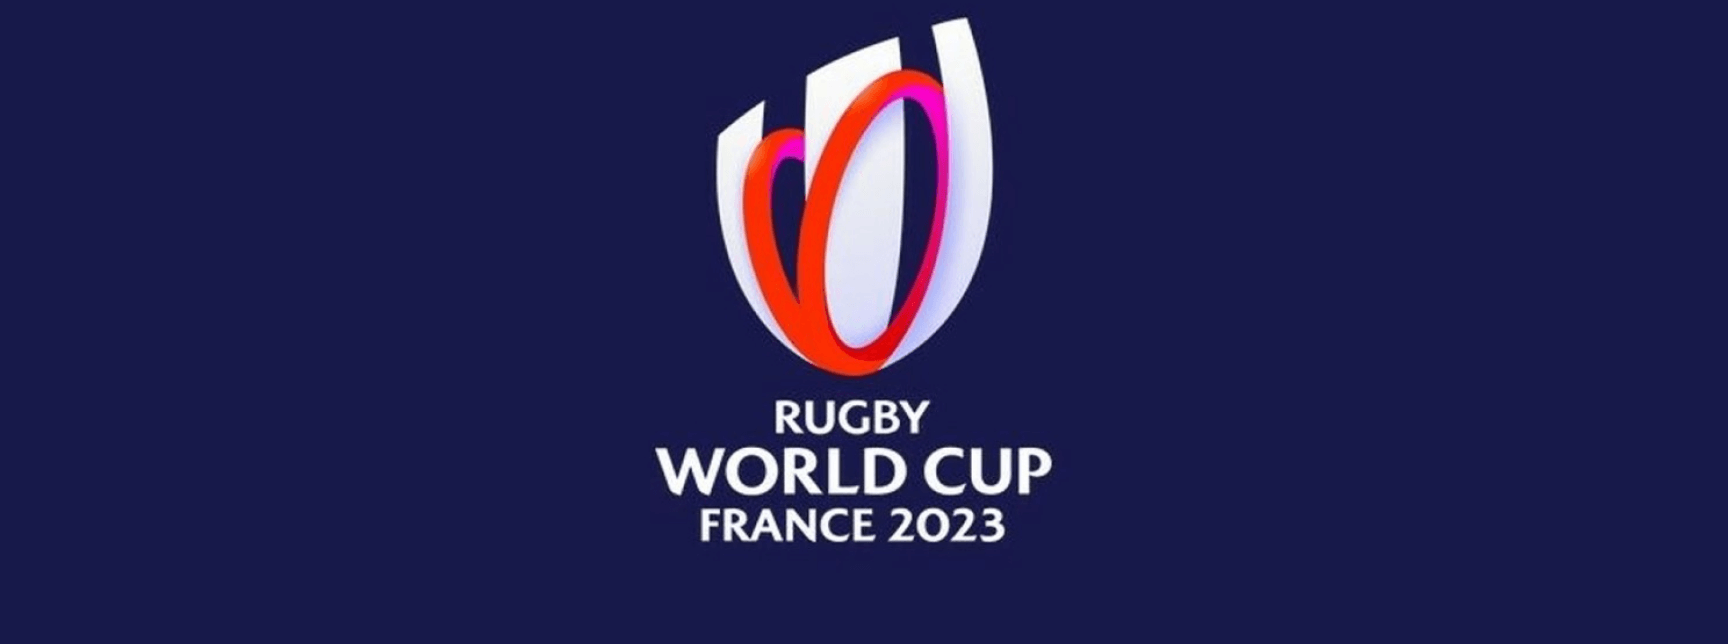 2023 Rugby World Cup logo